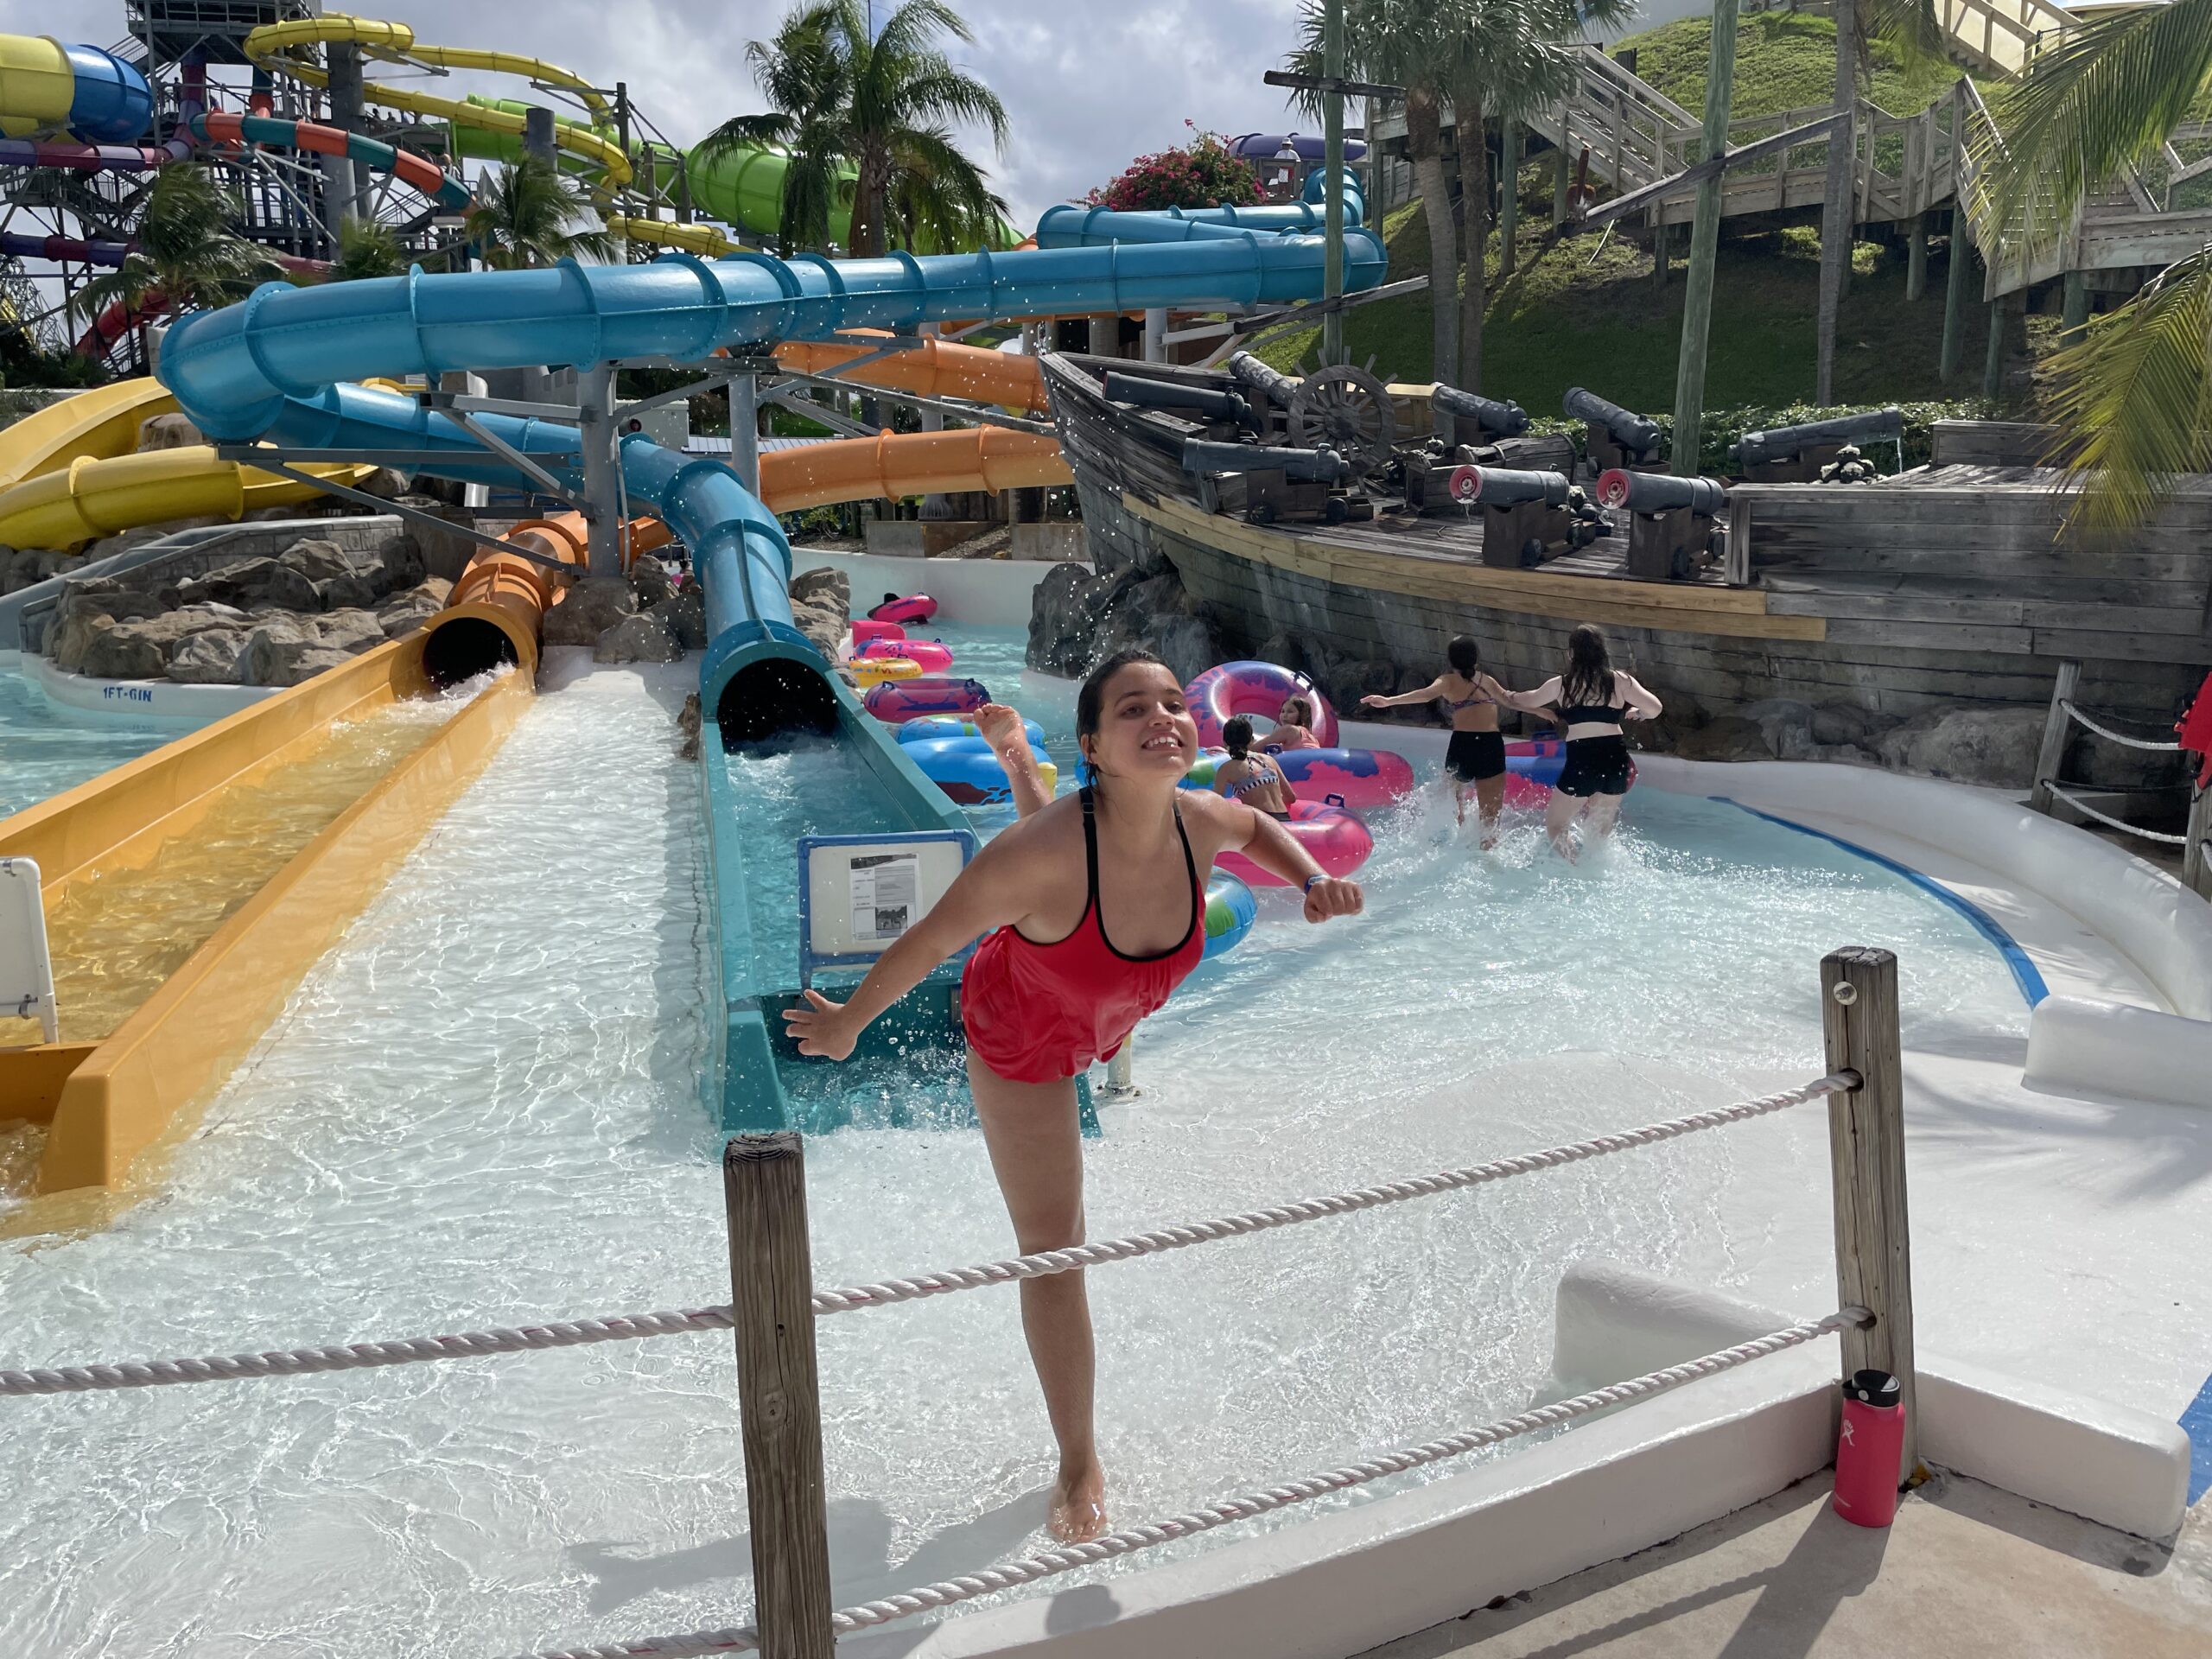 Rapids Water Park: The Largest Park in South Florida